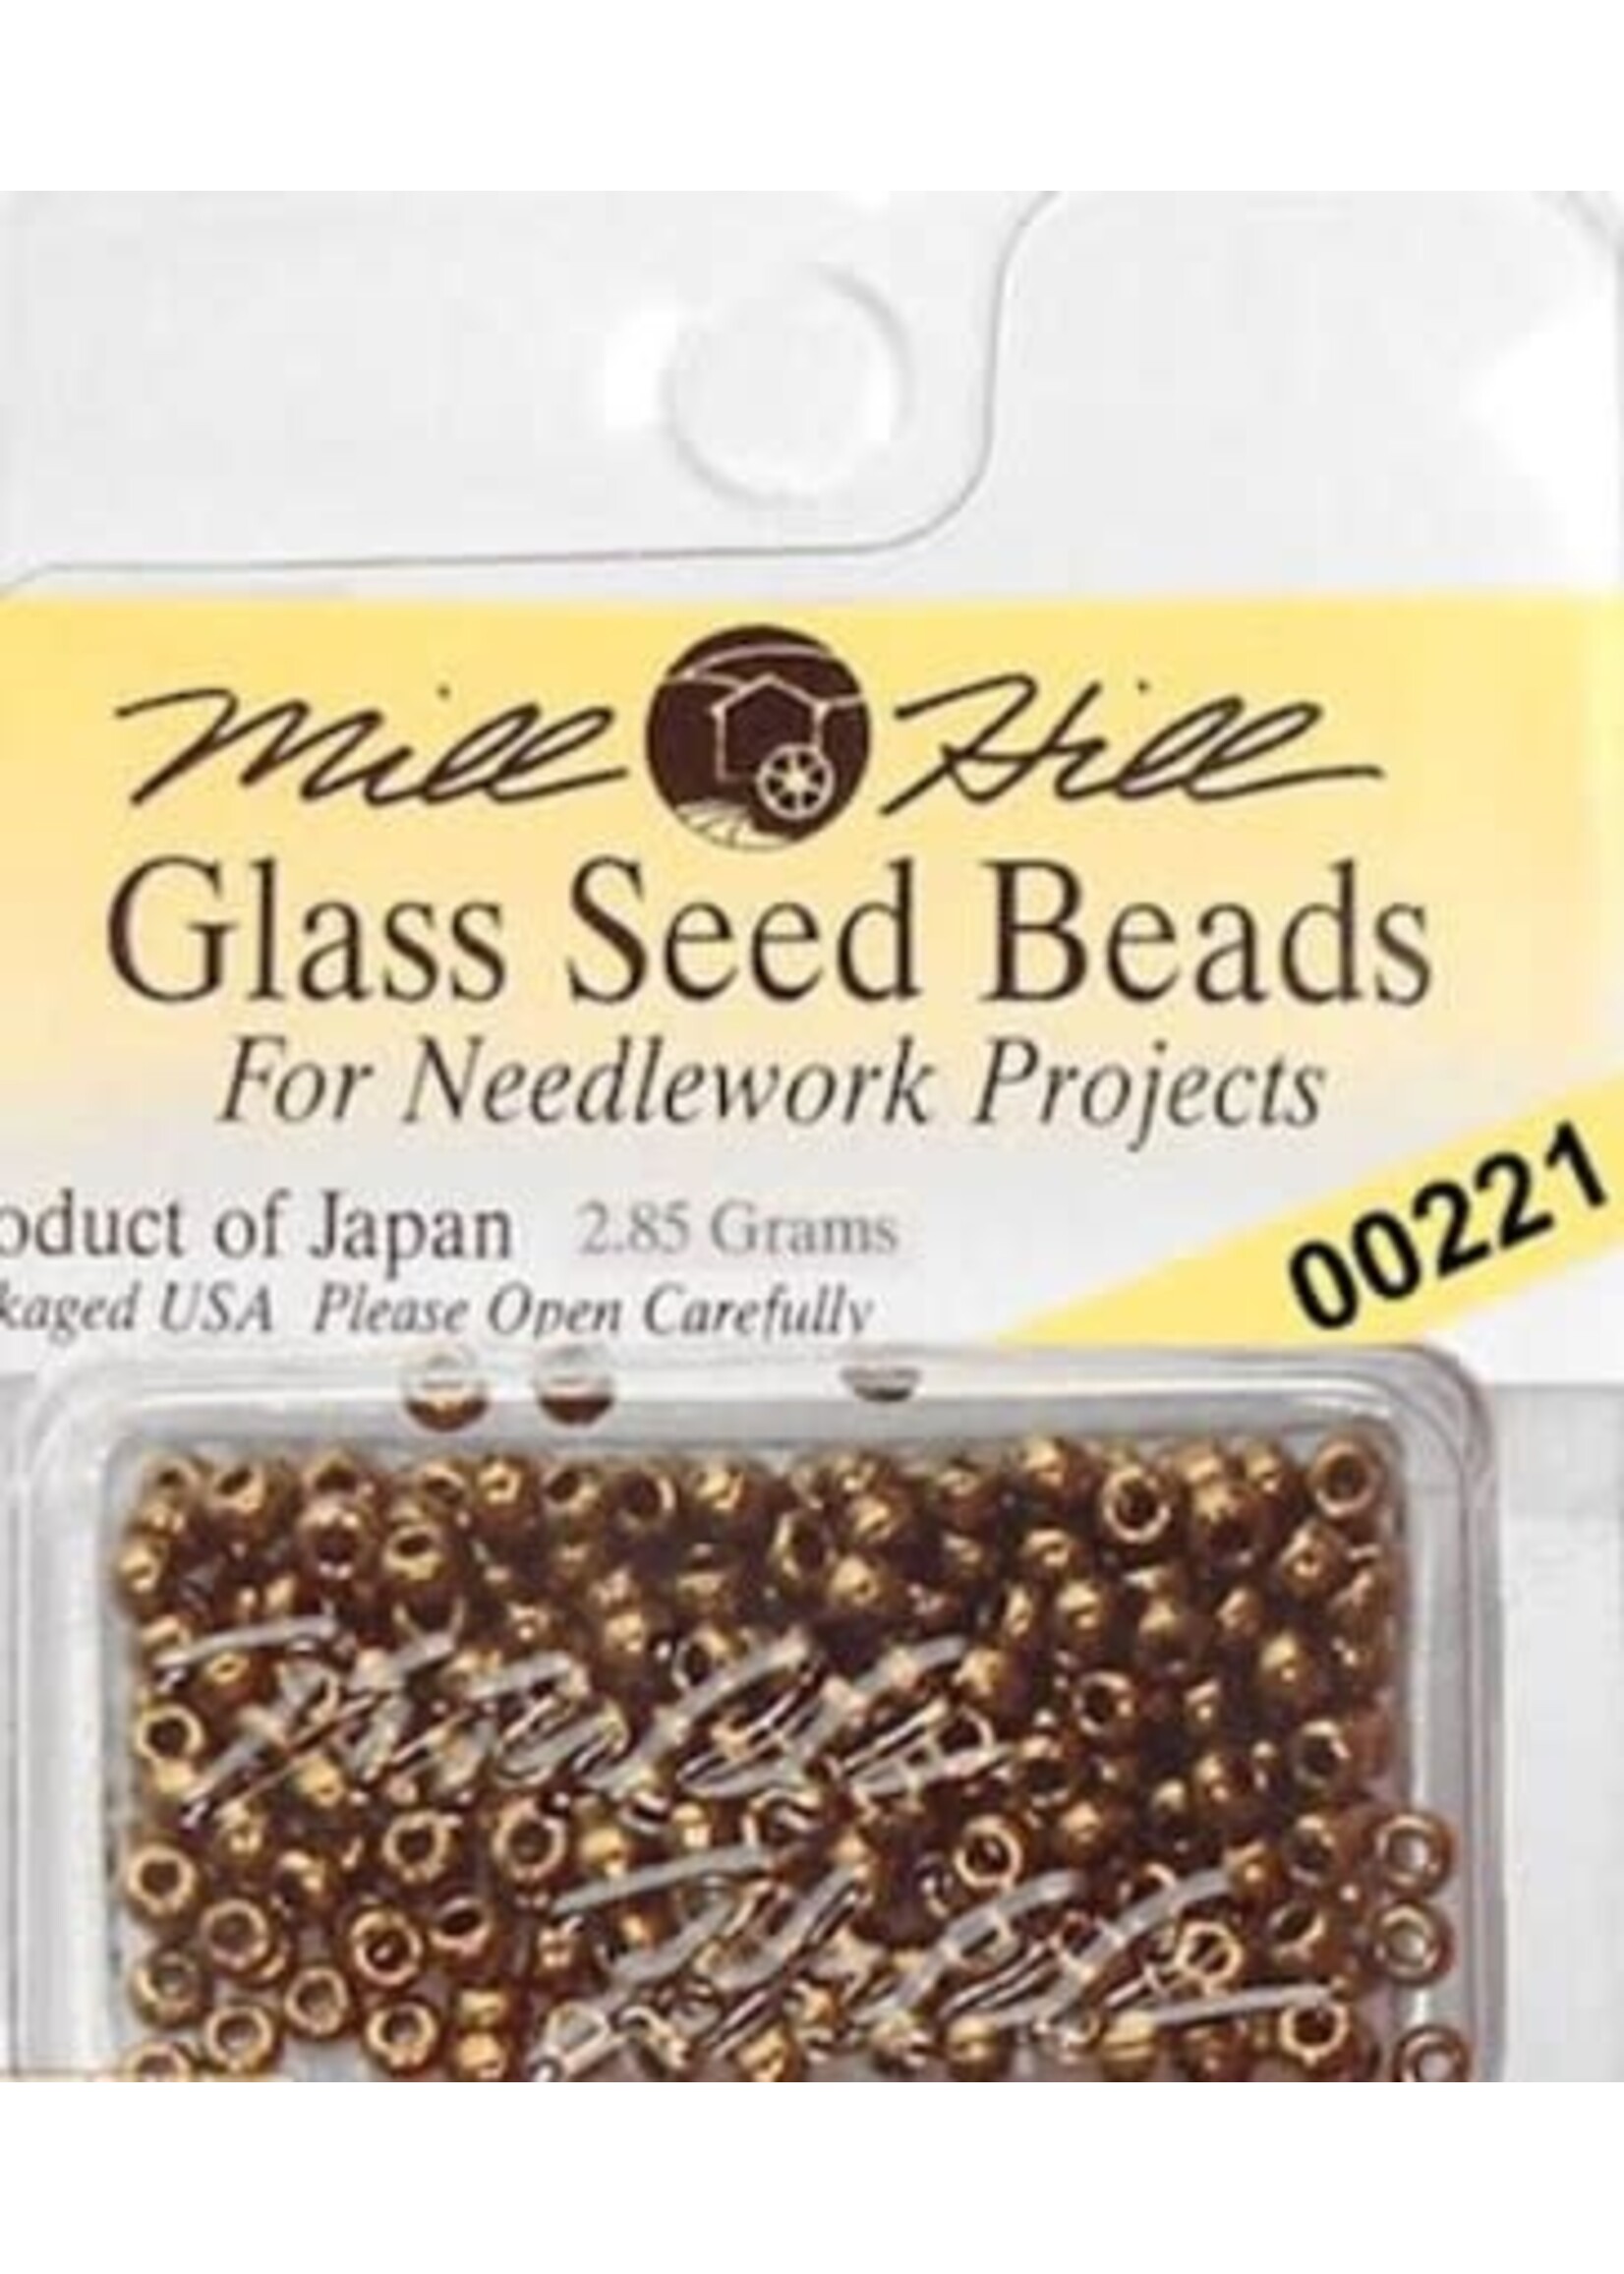 Mill Hill Seed Beads, 00221, Bronze